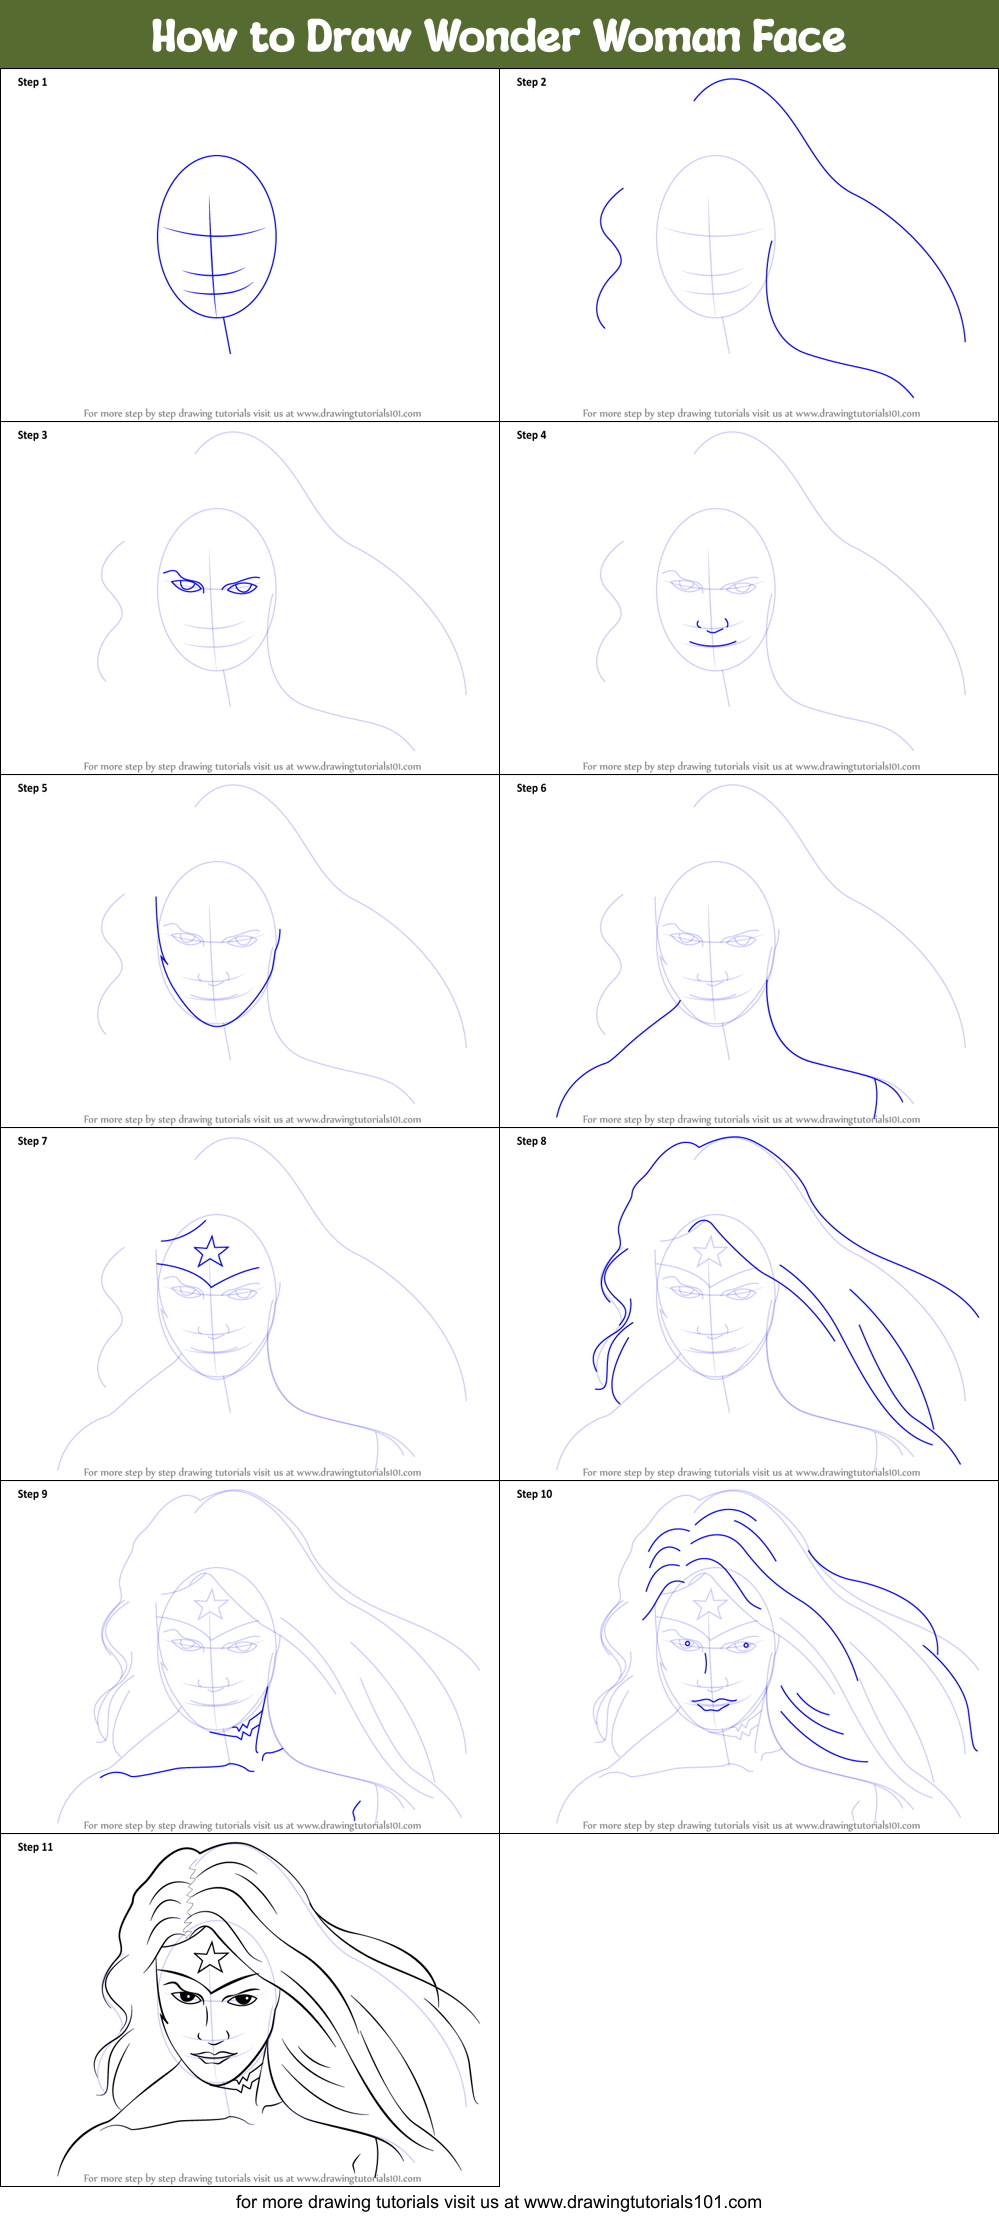 How to Draw Wonder Woman Face printable step by step